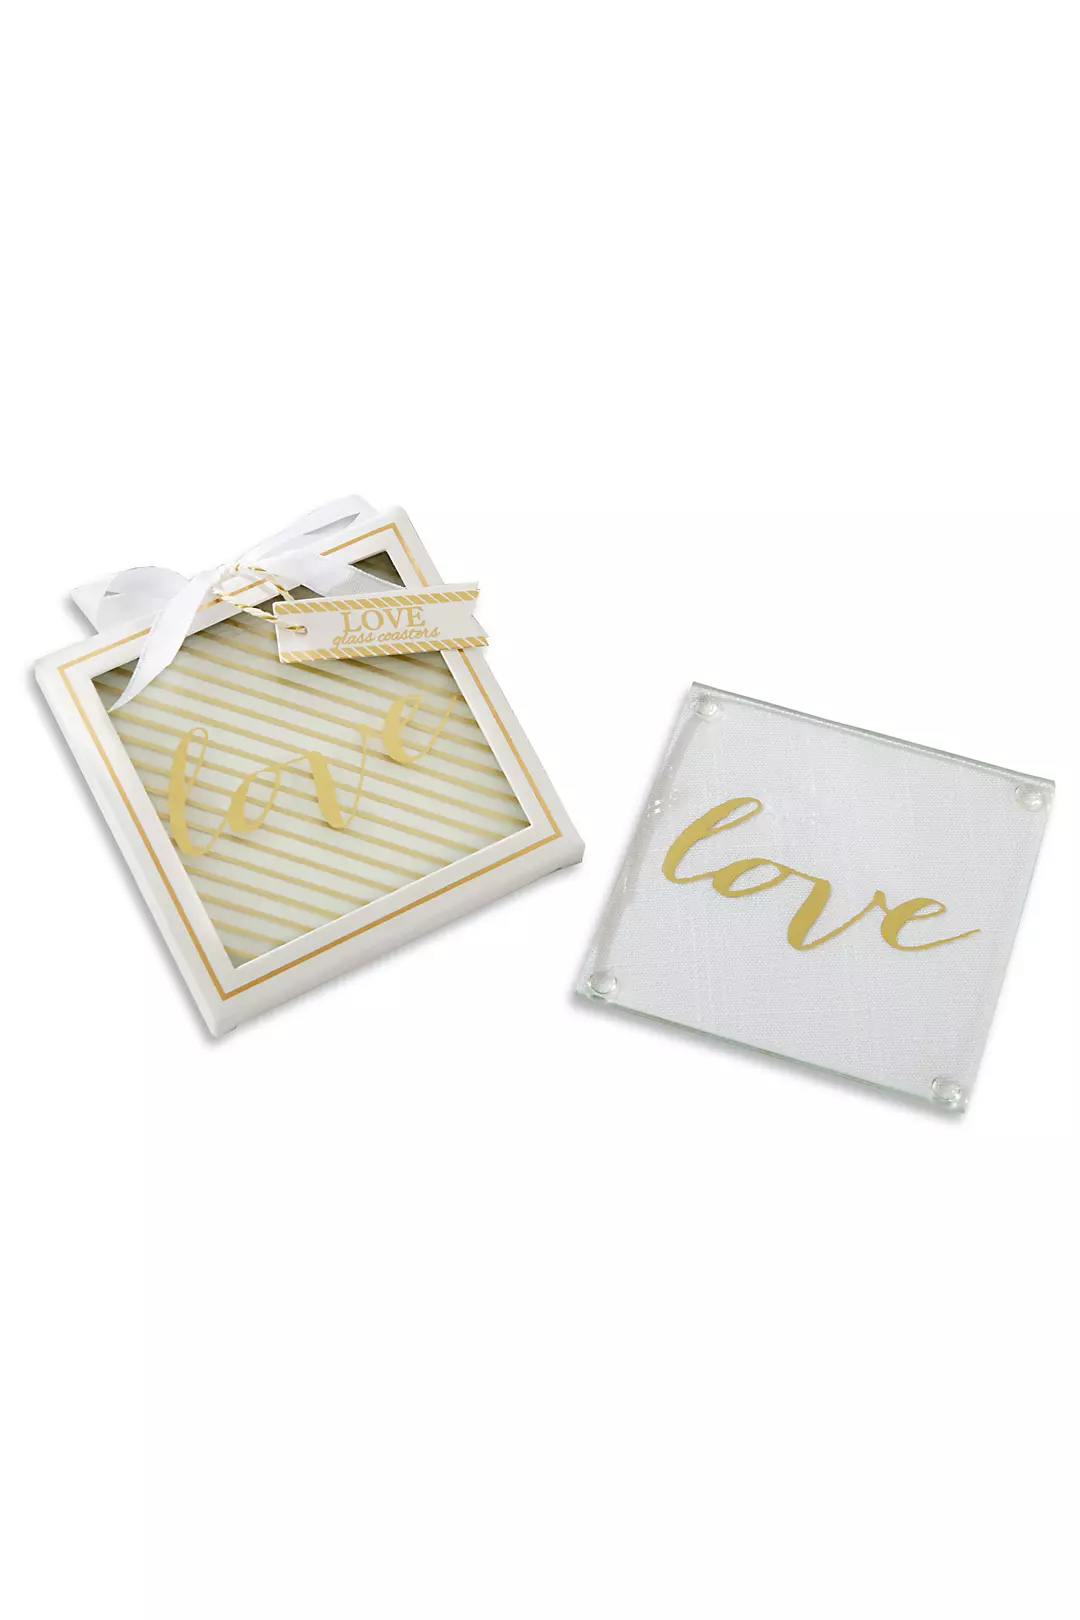 Gold Love Glass Coasters Set of 2 Image